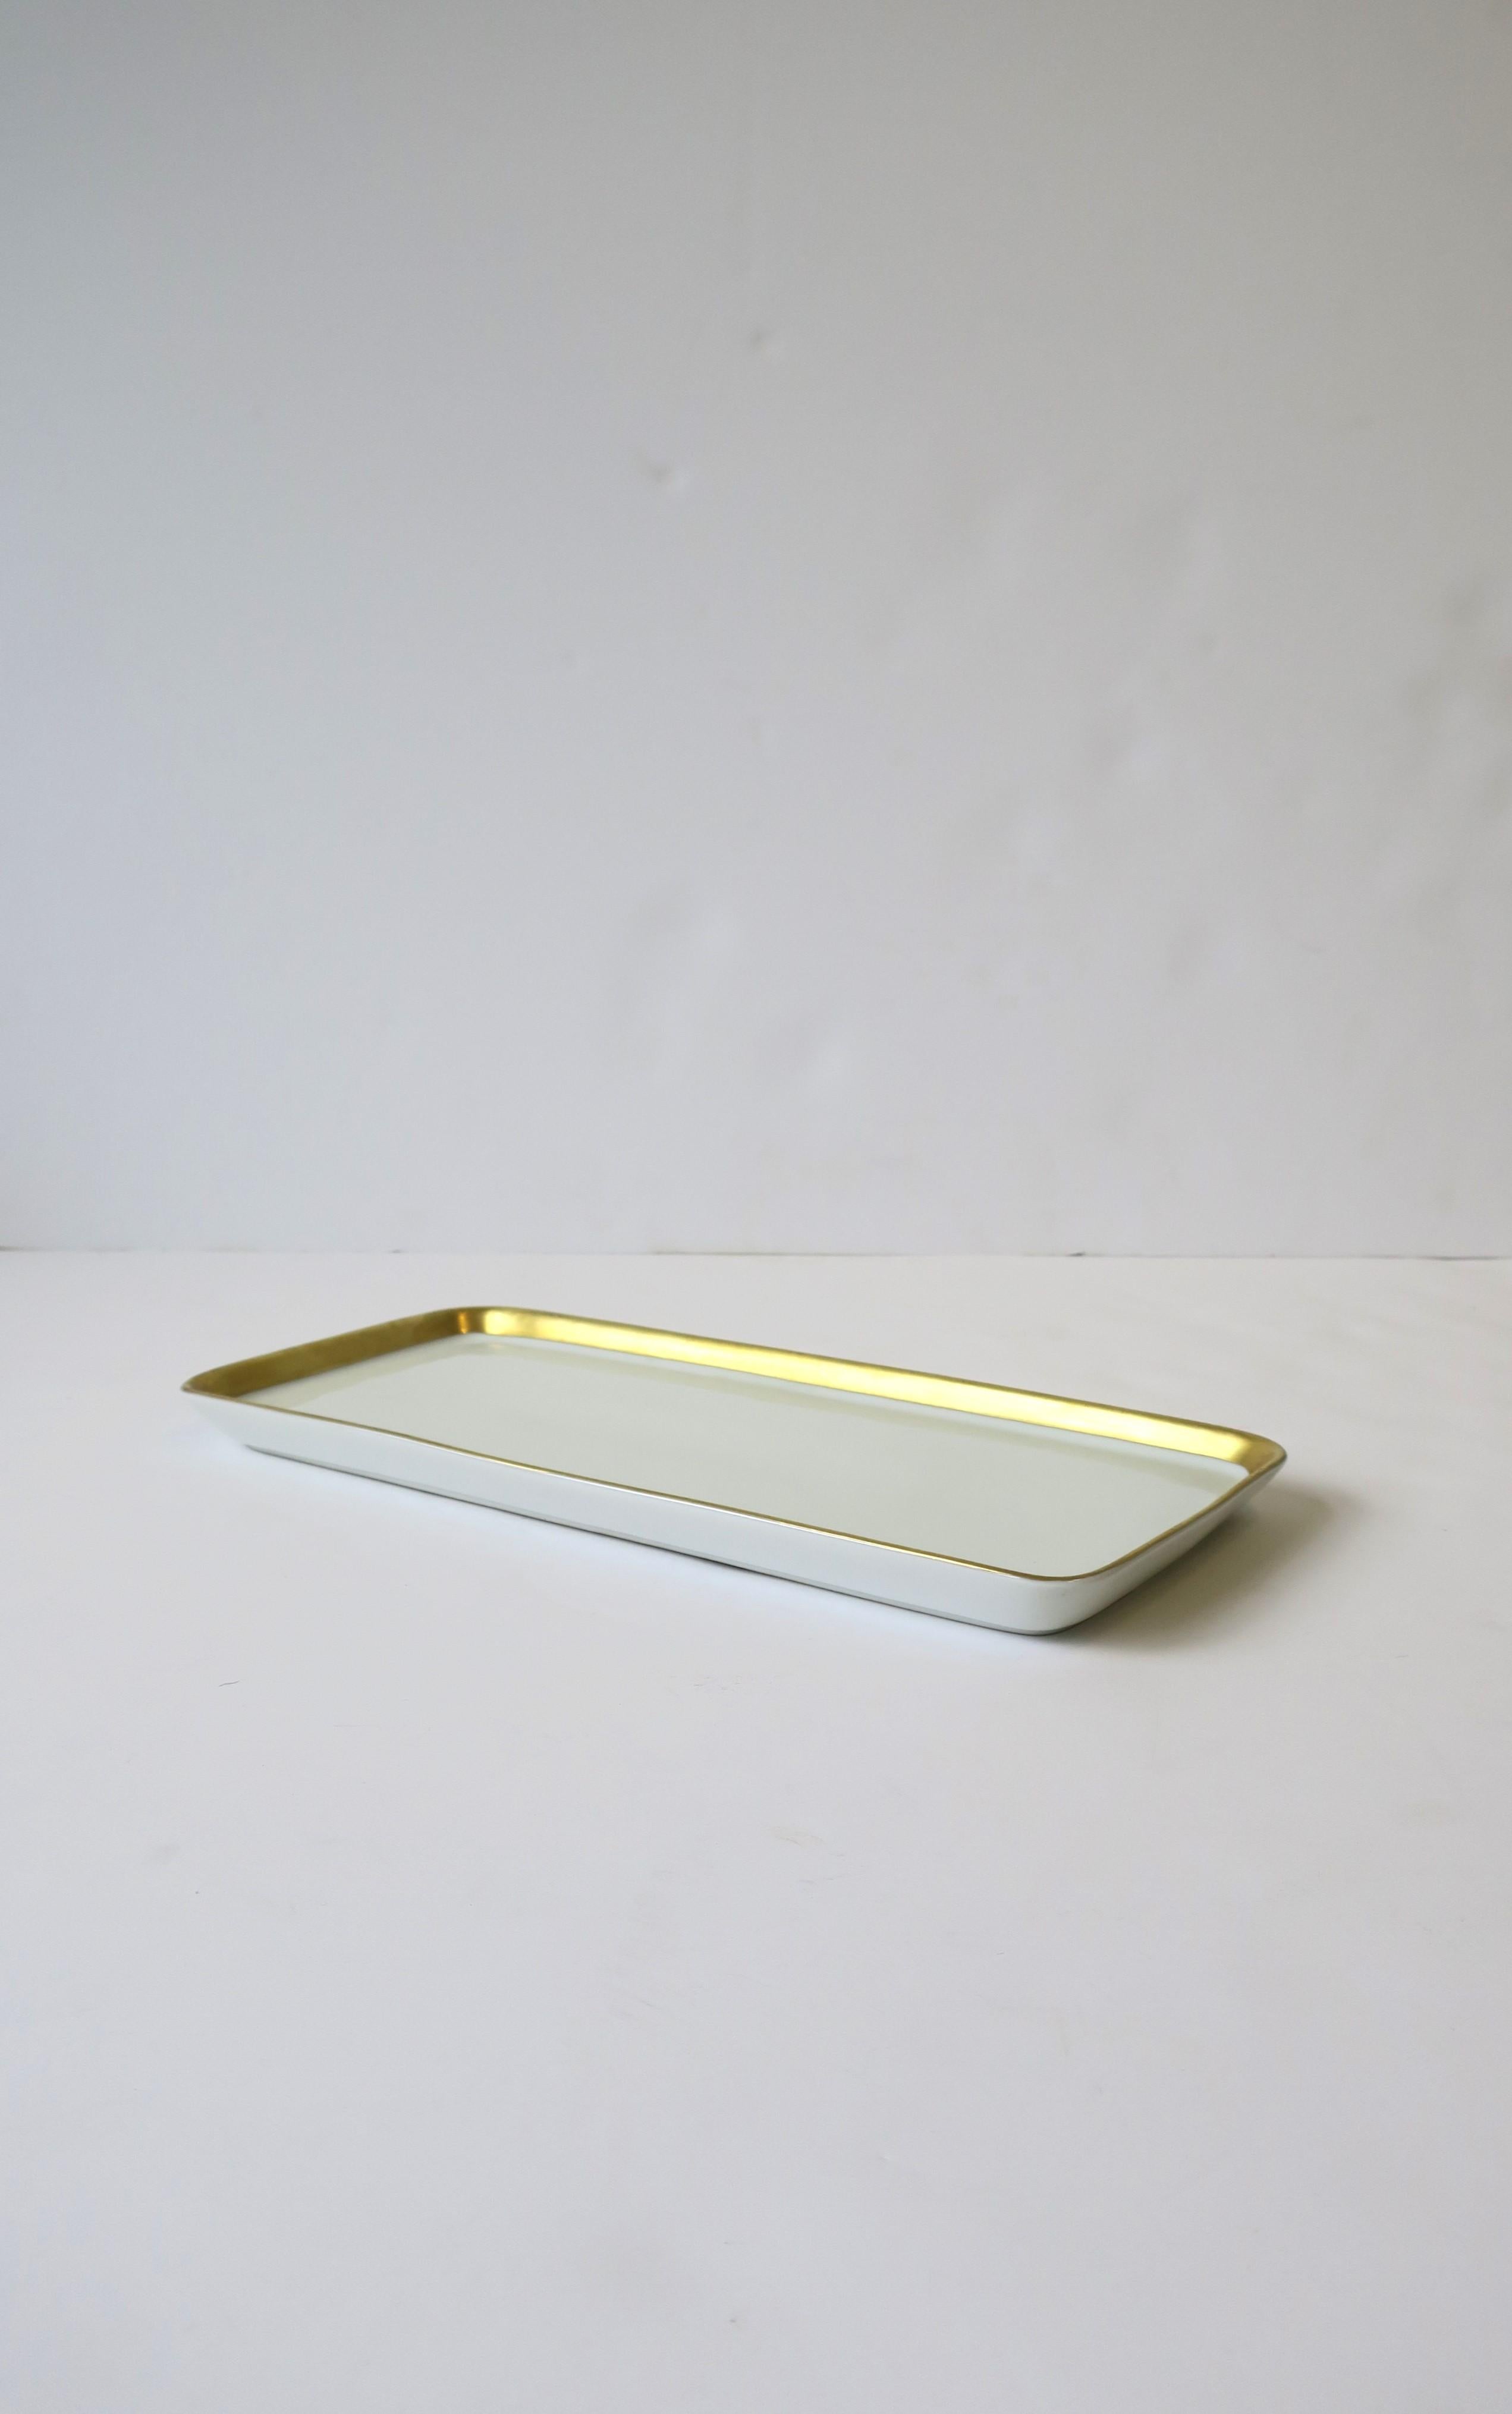 White Porcelain and Gold Serving Tray by Rosenthal Kurfurstendamm Berlin For Sale 1